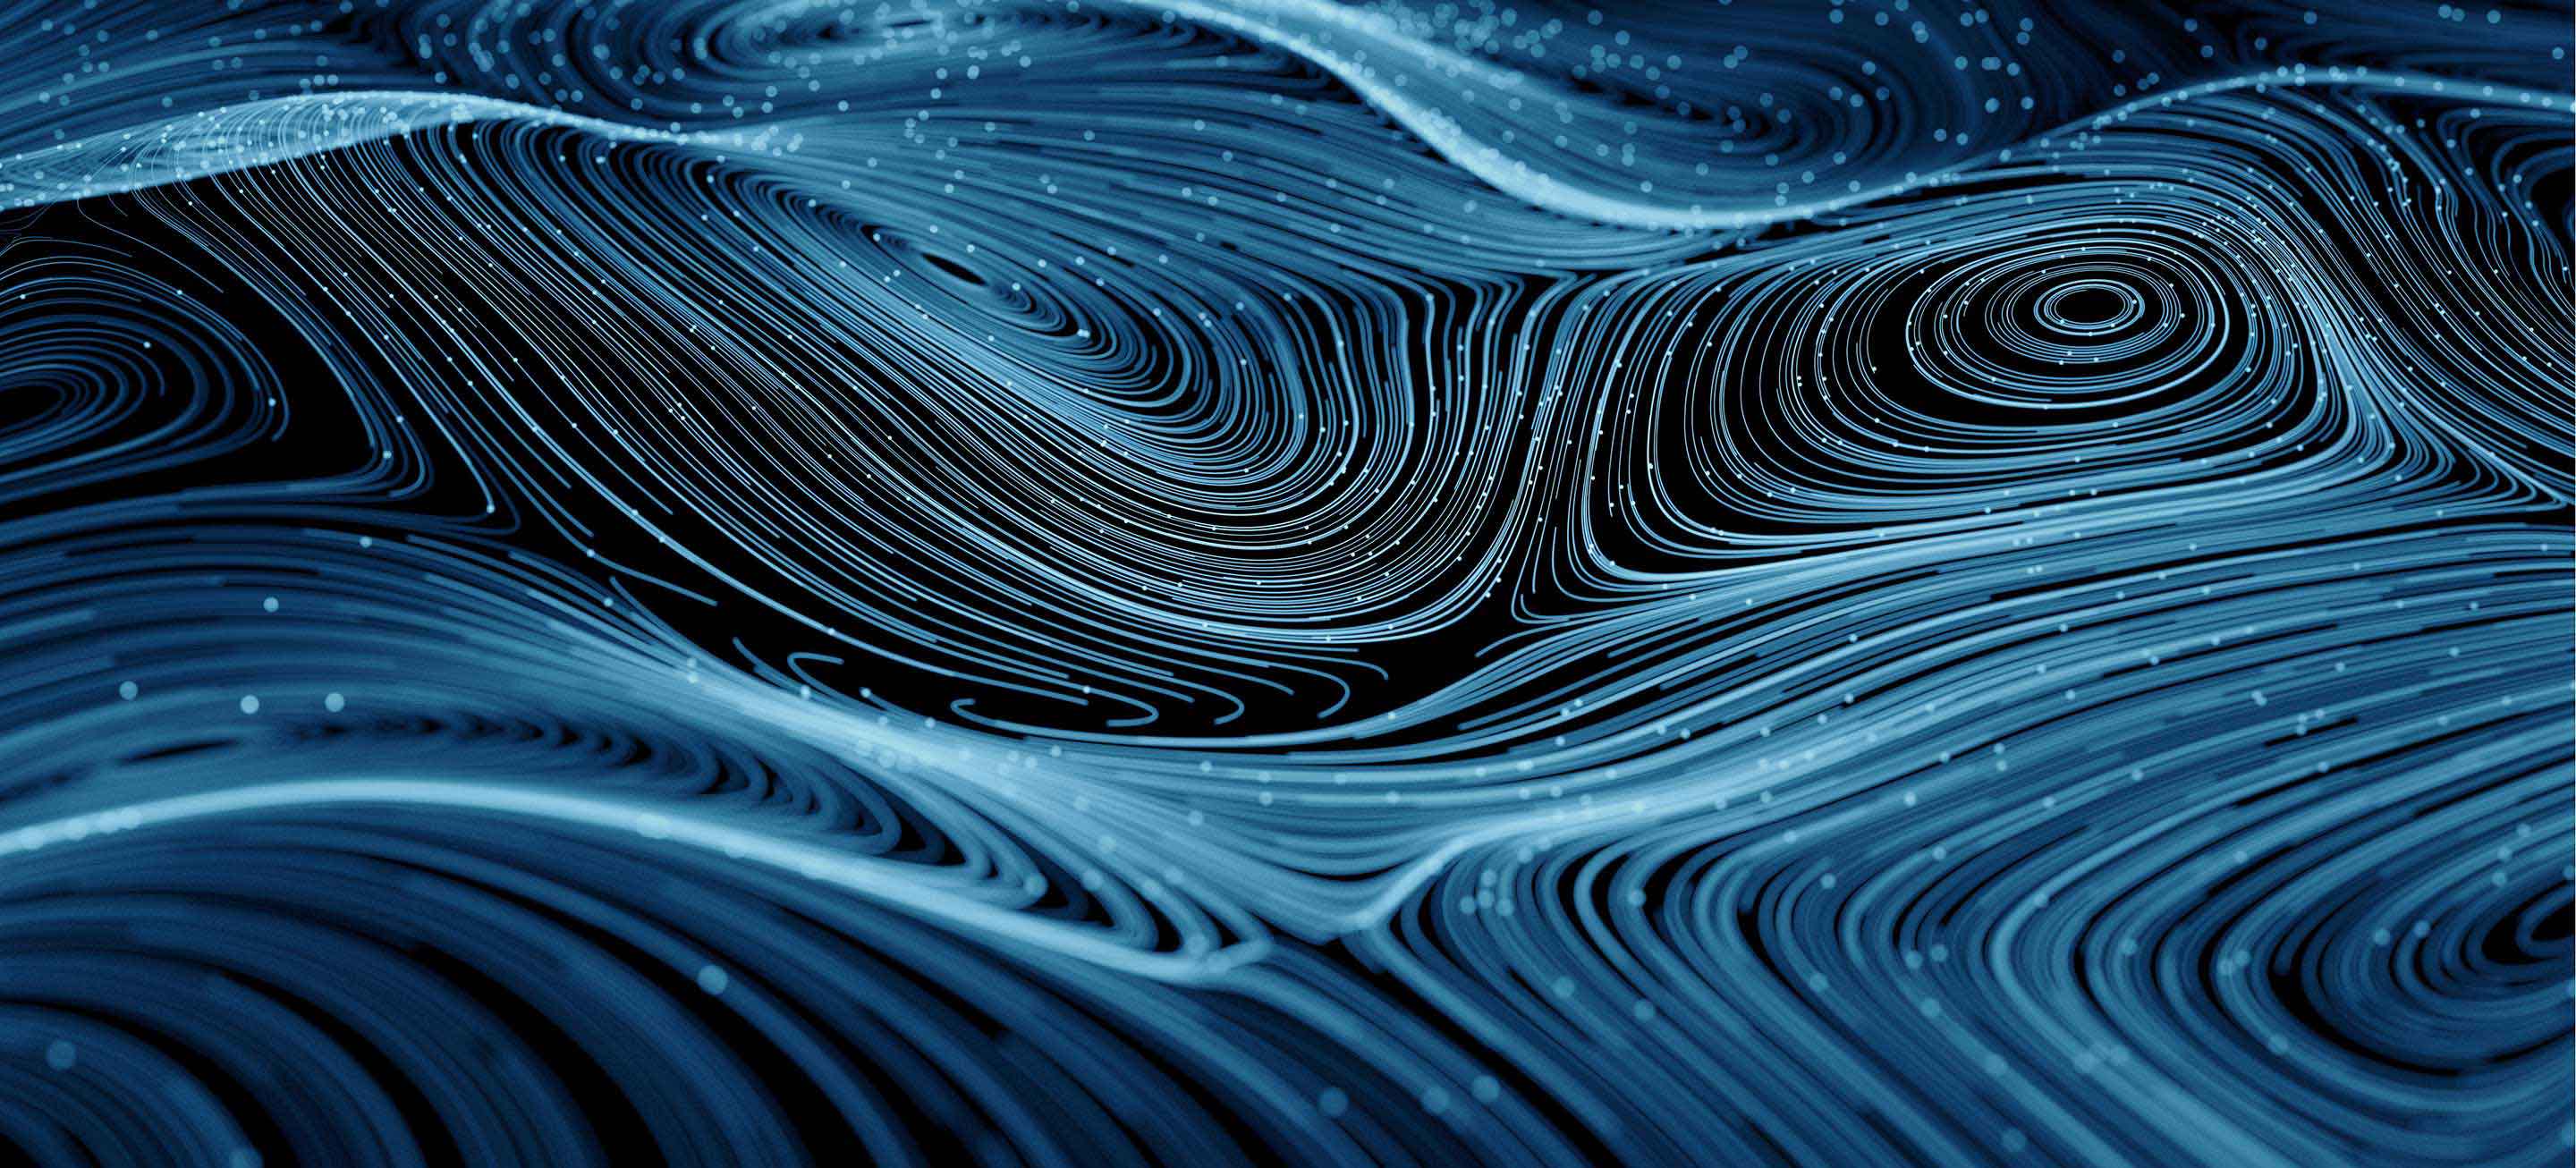 Abstract image of blue particles and lines 